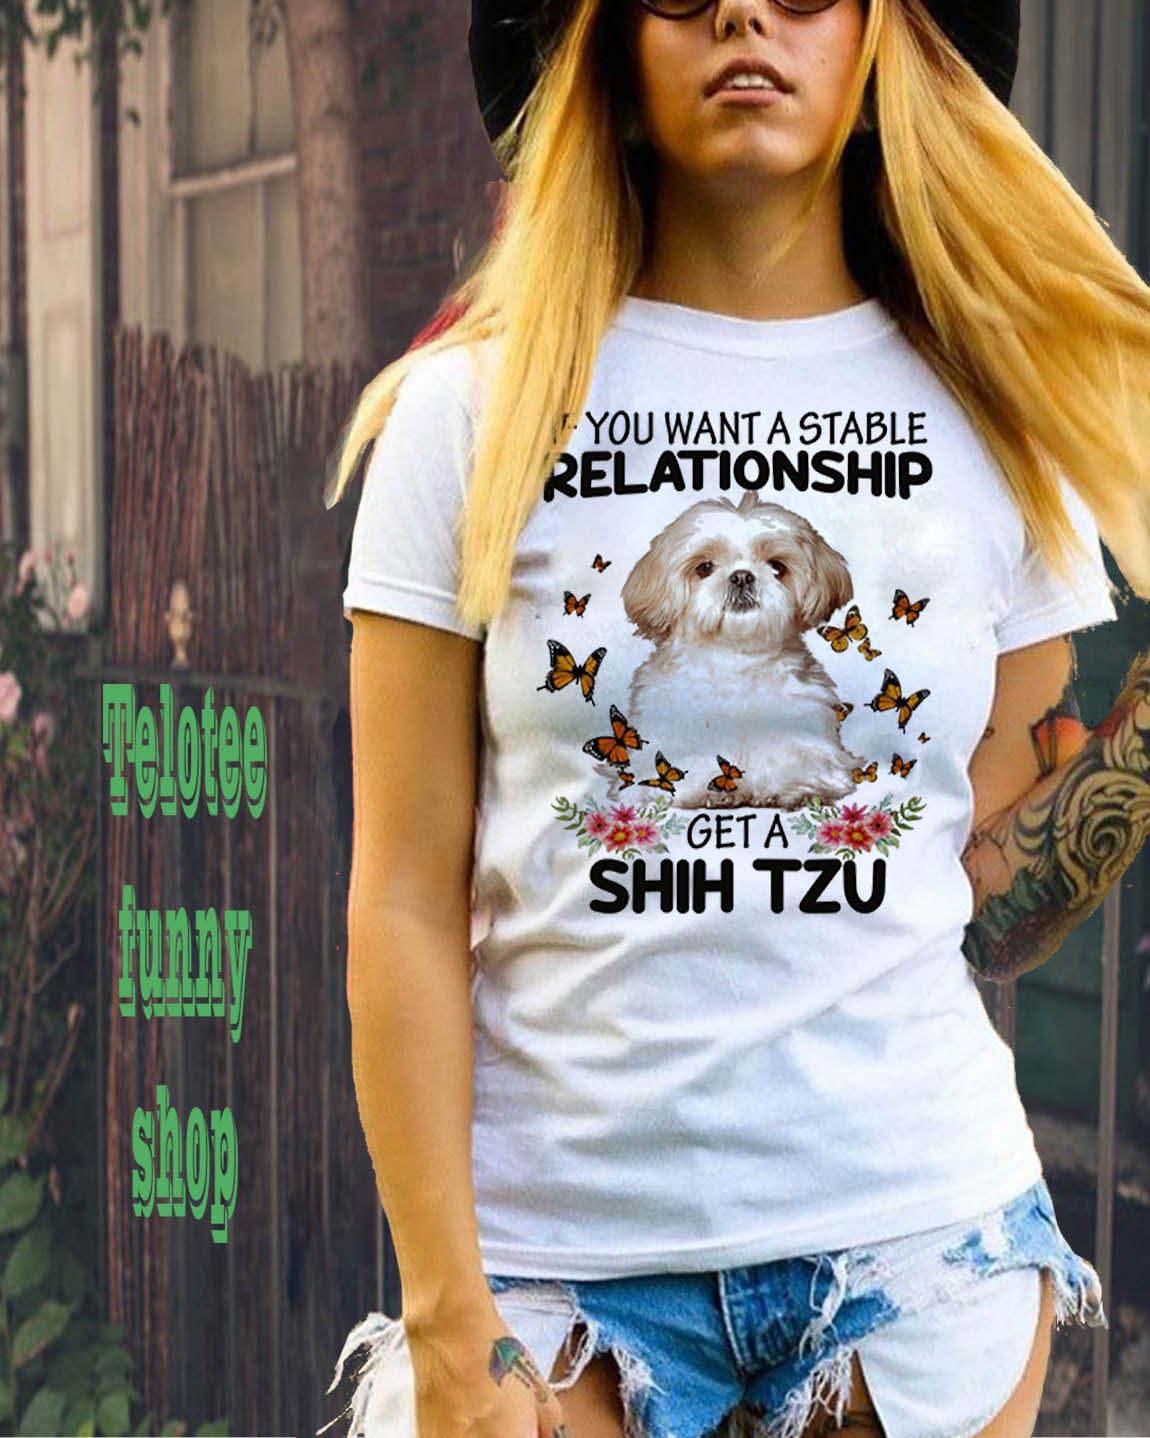 If you want a stable relationship get a Shih Tzu